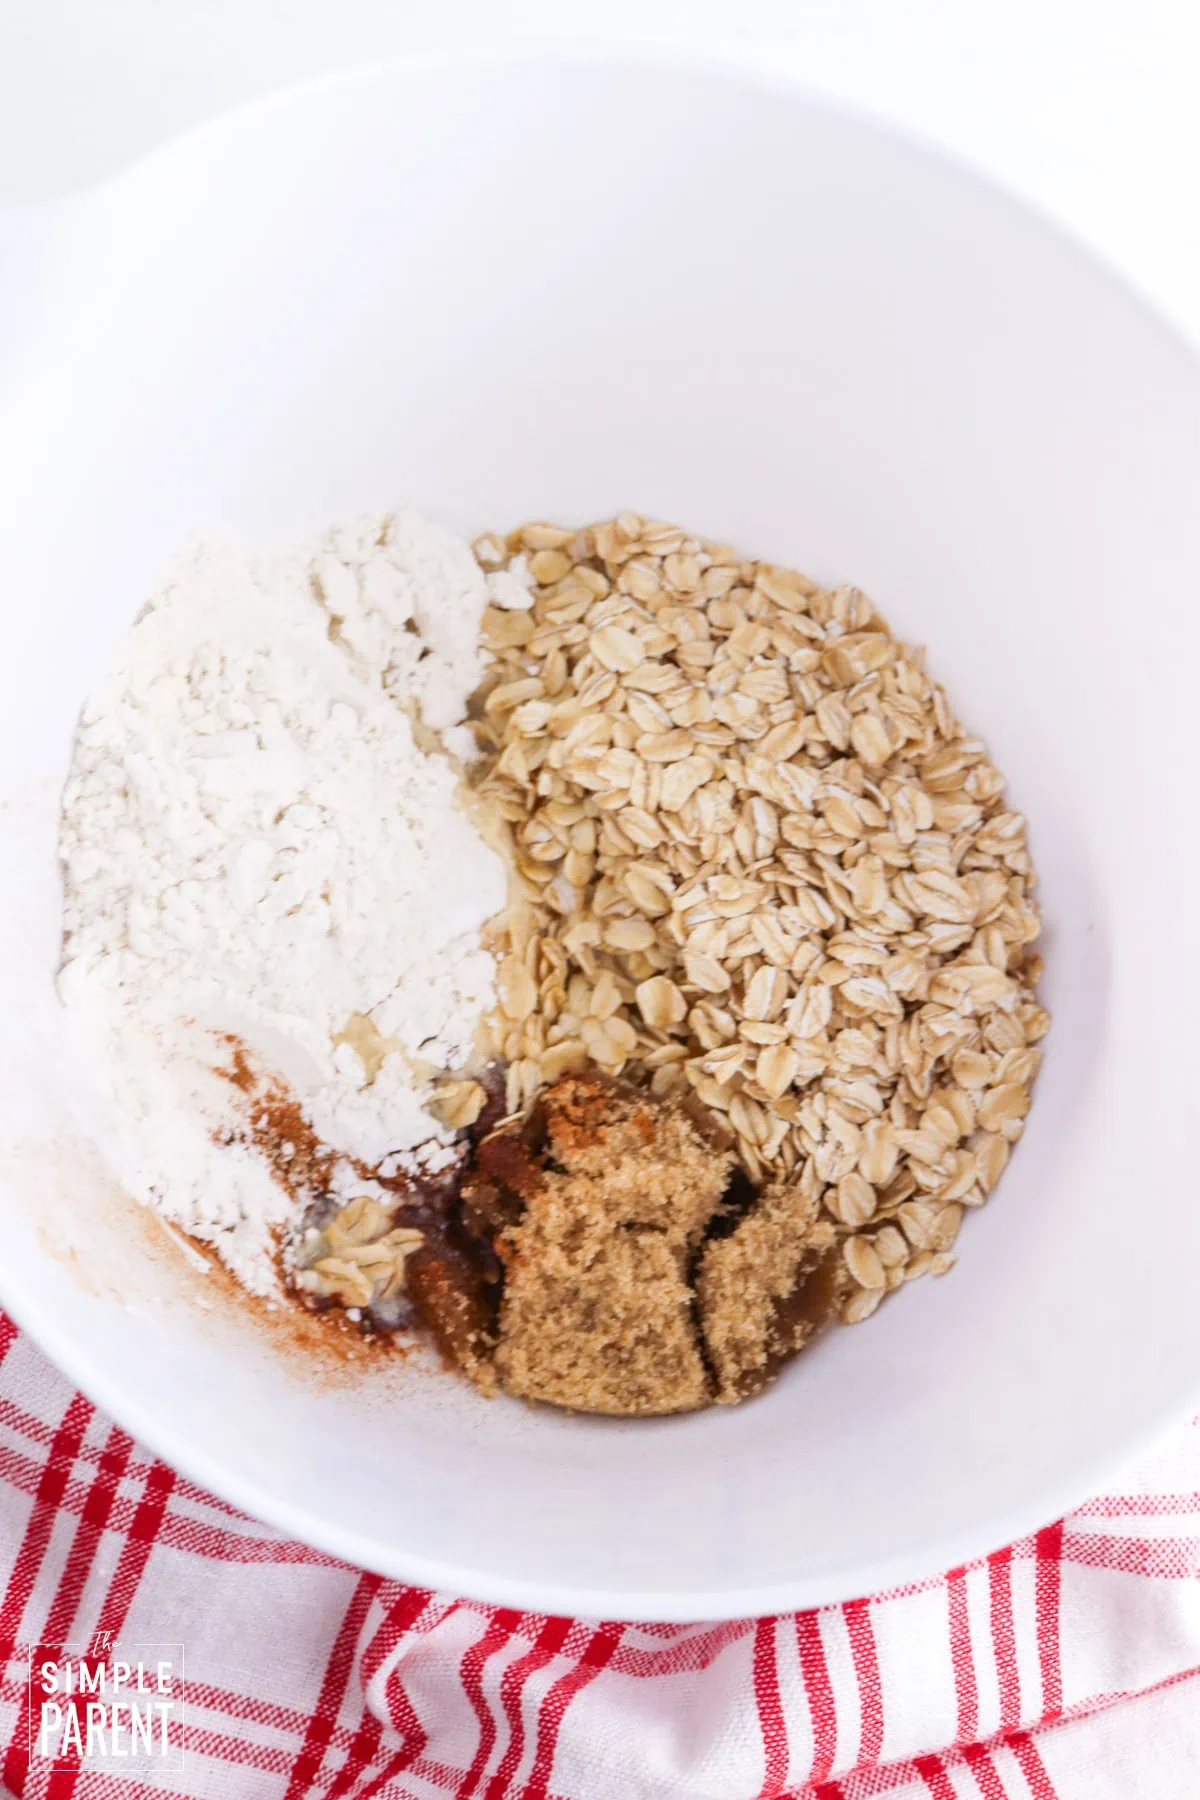 Apple Crisp topping ingredients in a white mixing bowl